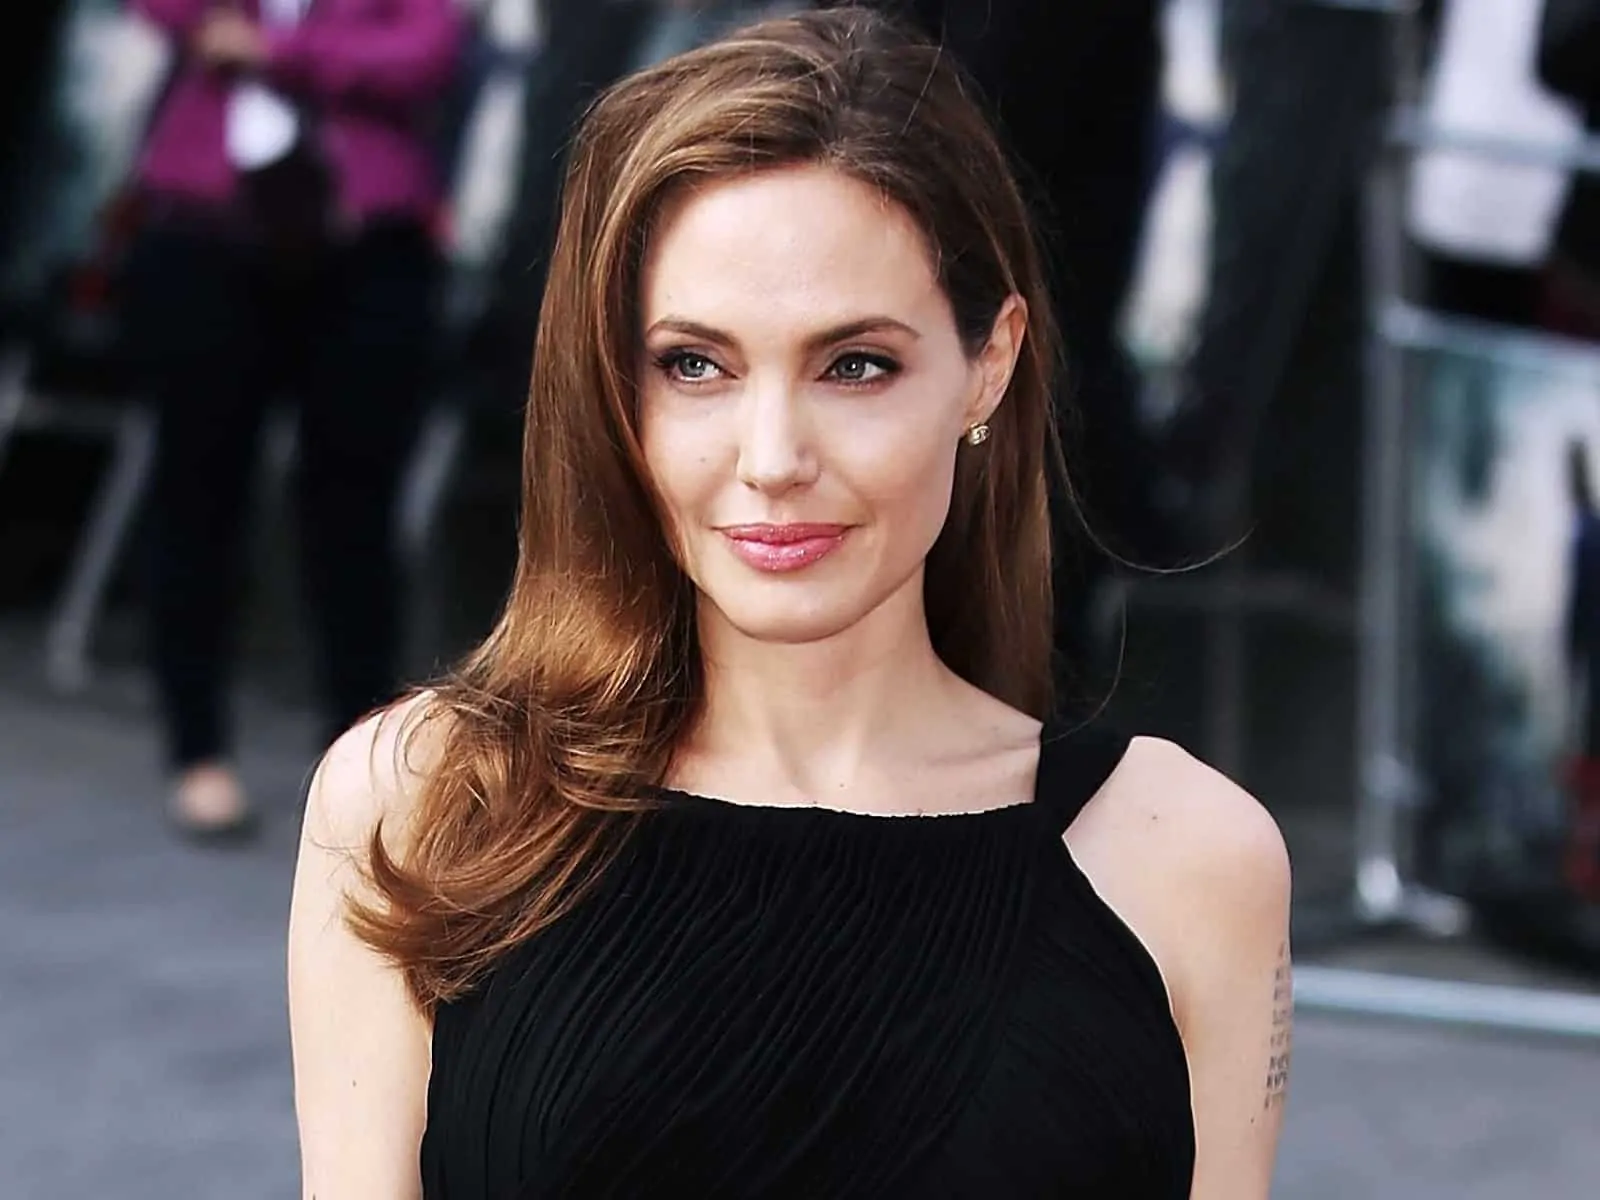 Top 10 Most Popular Hollywood Actresses In 2020 - Angelina Jolie